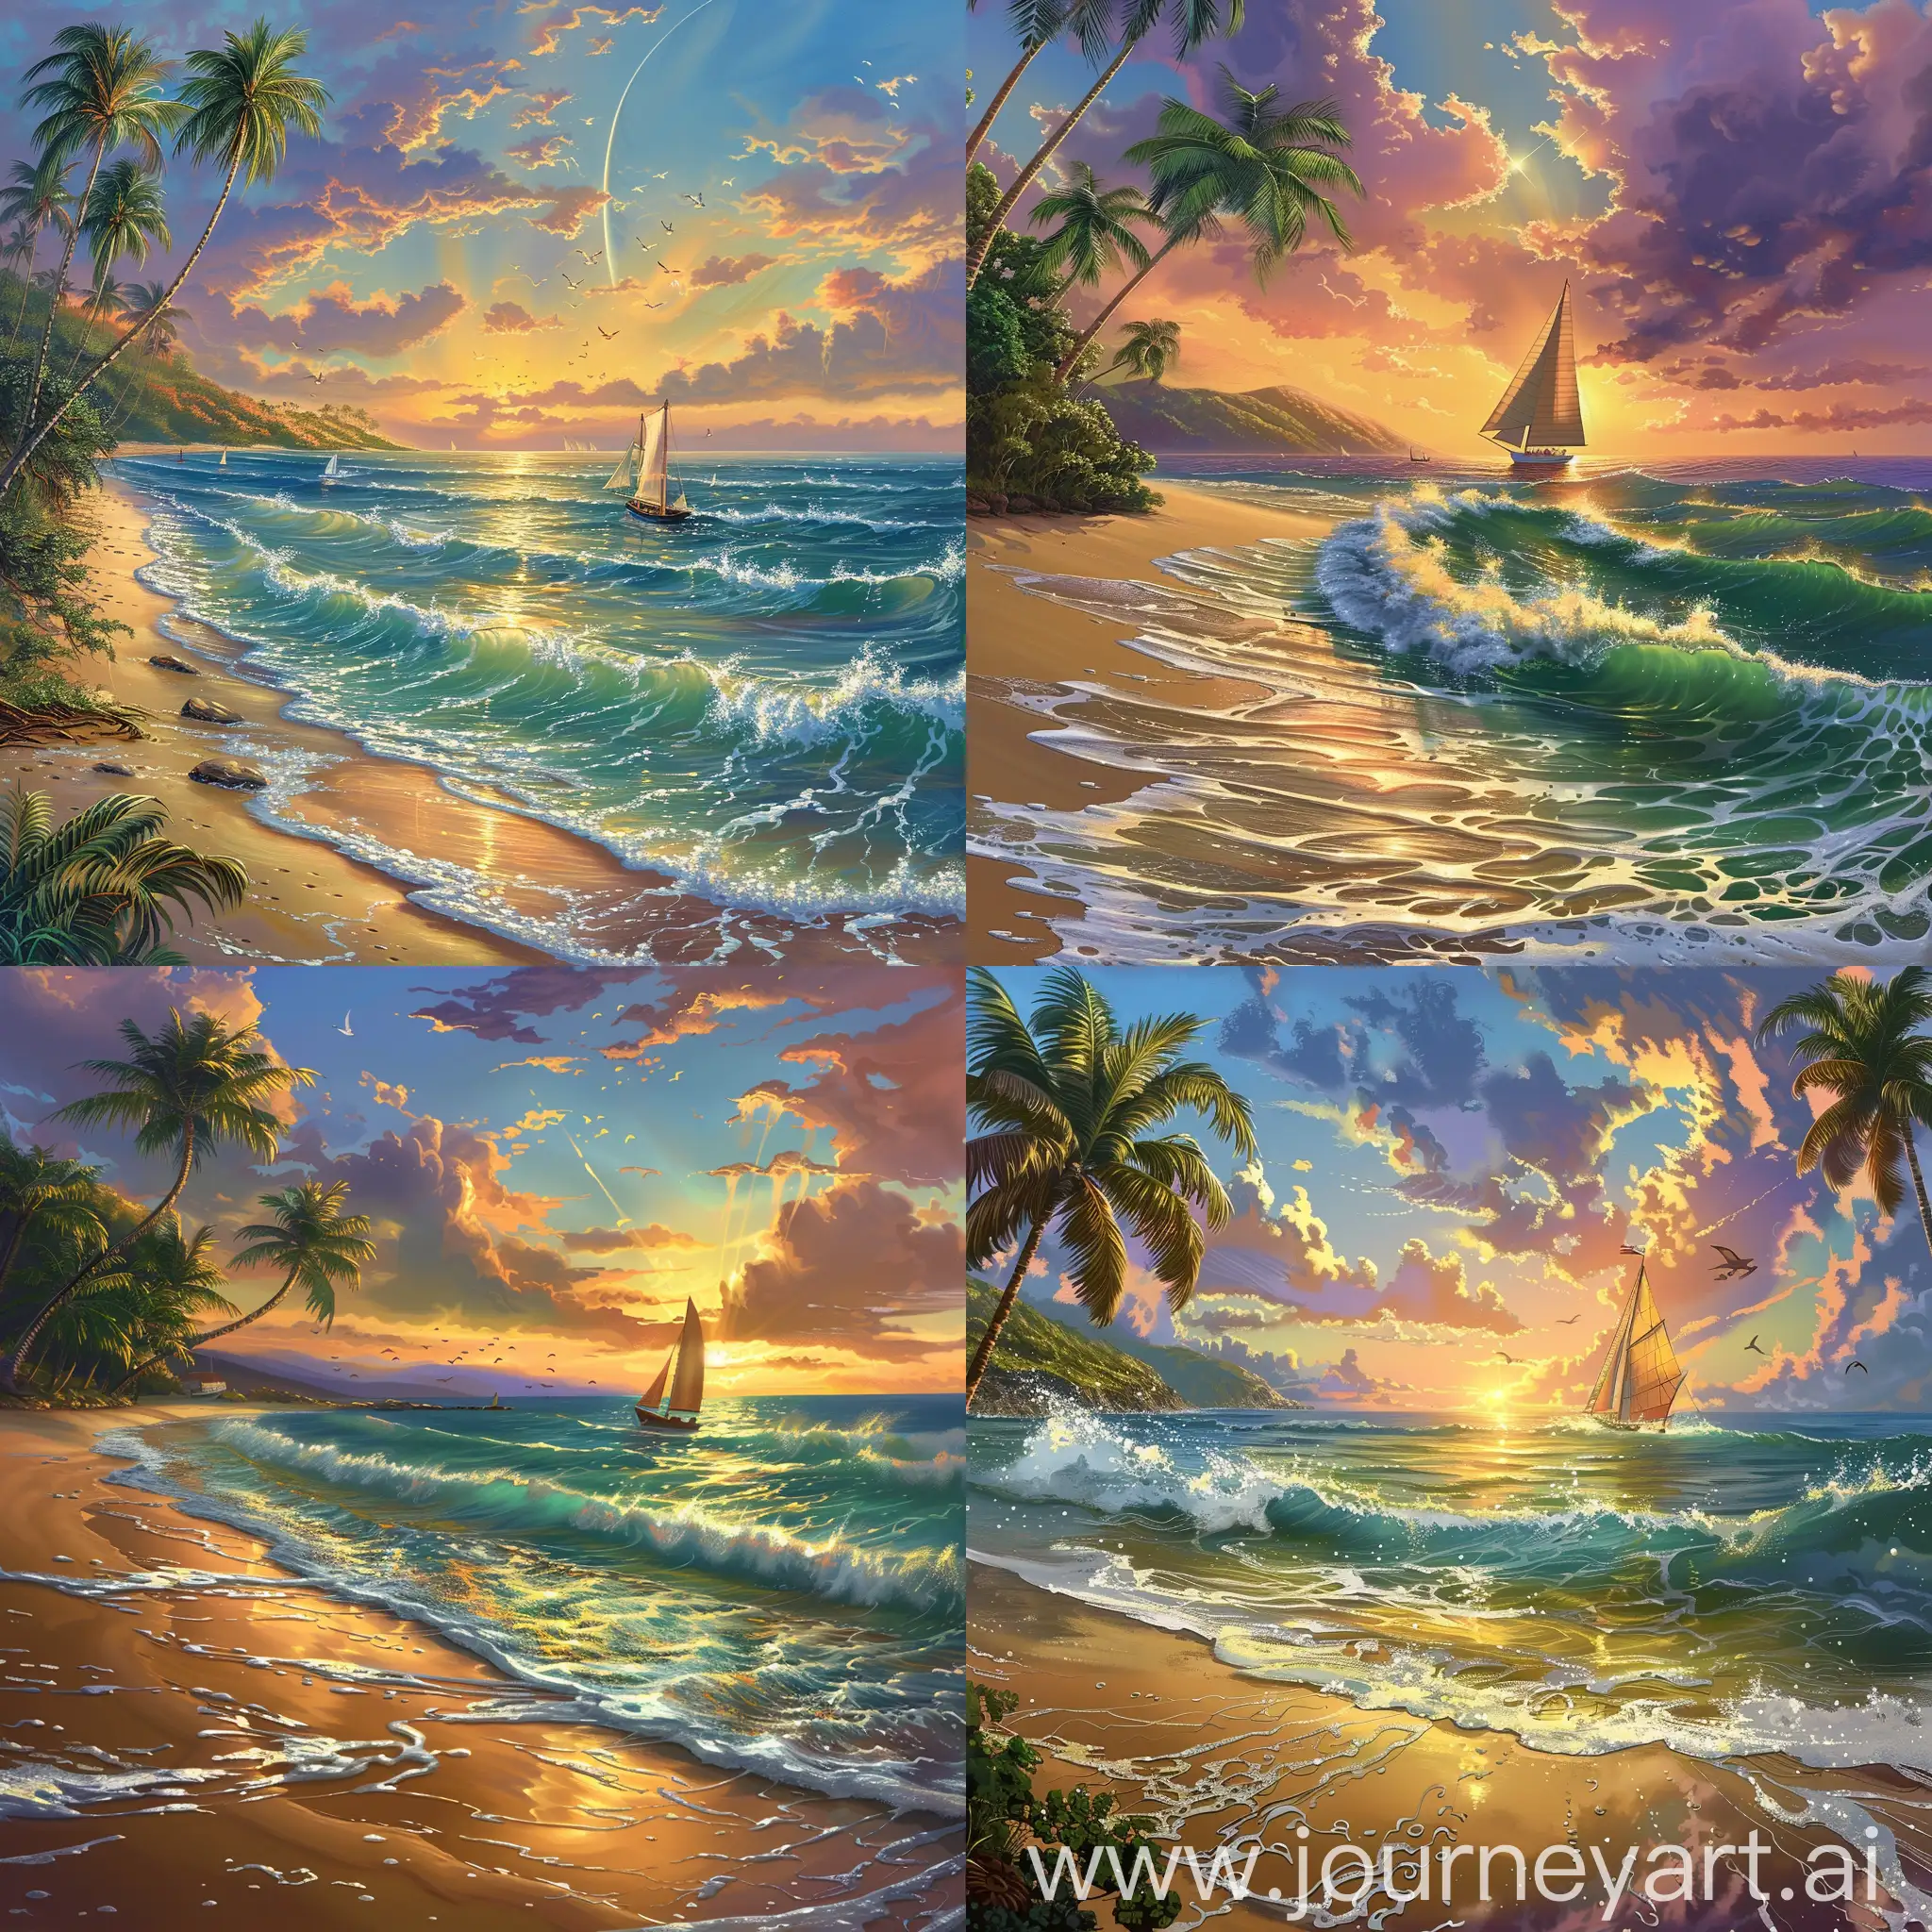 Generate a tranquil coastal landscape with golden sandy beaches, gentle waves lapping against the shore, and palm trees swaying in the breeze. Include a colorful sunset painting the sky with warm hues, and a distant sailboat adding a sense of adventure and serenity to the scene. The image should evoke a feeling of relaxation and escape.